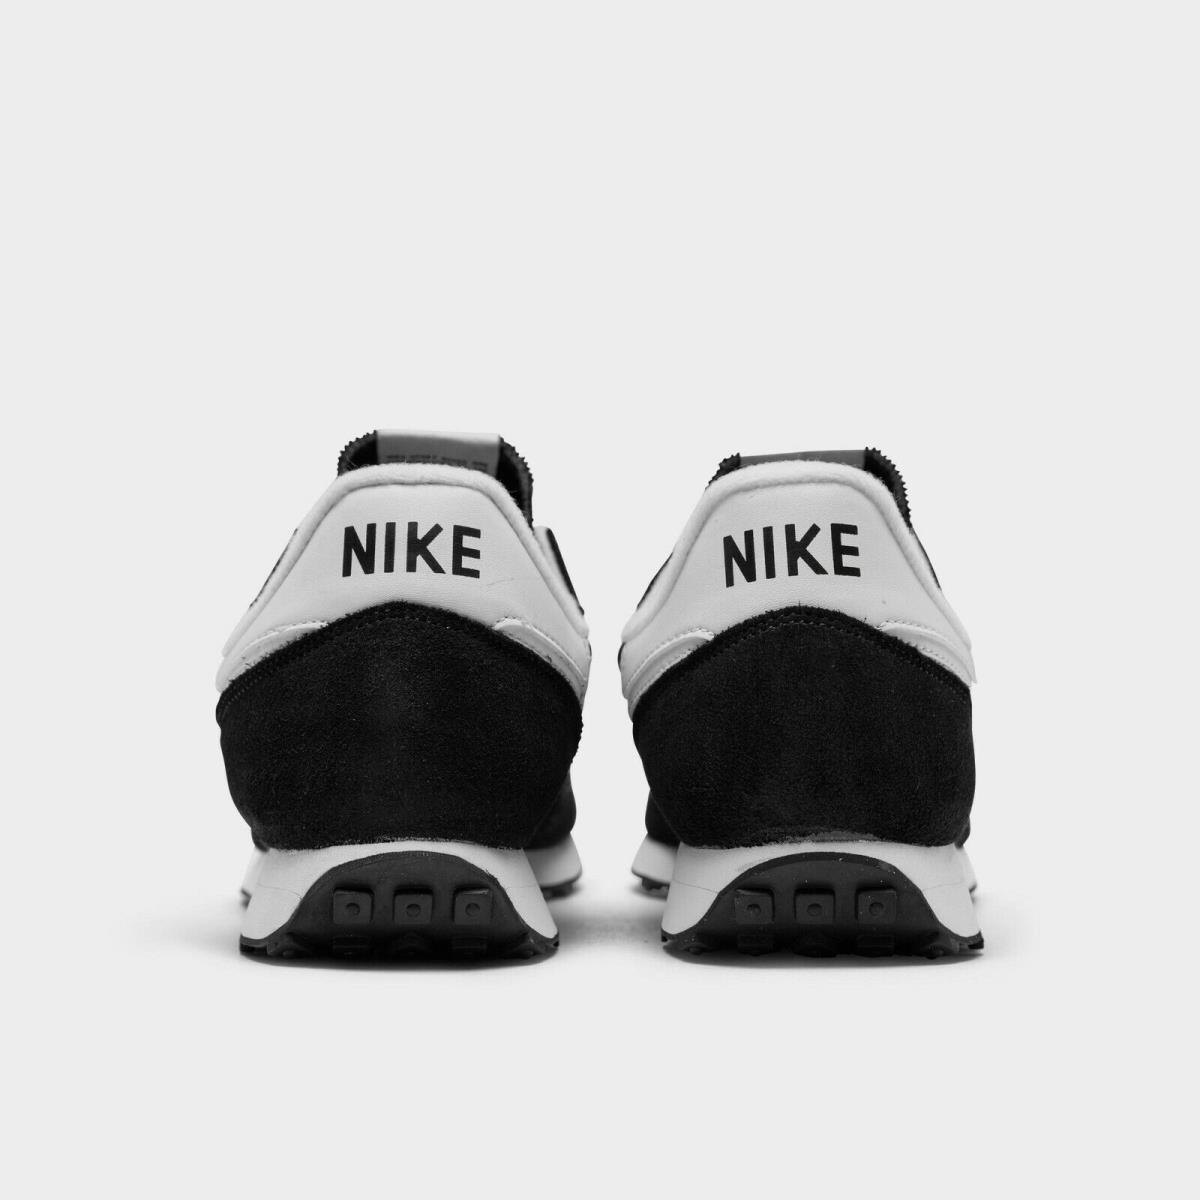 Nike Challenger OG Casual Shoes Black / White Sz 8 CW7645 002